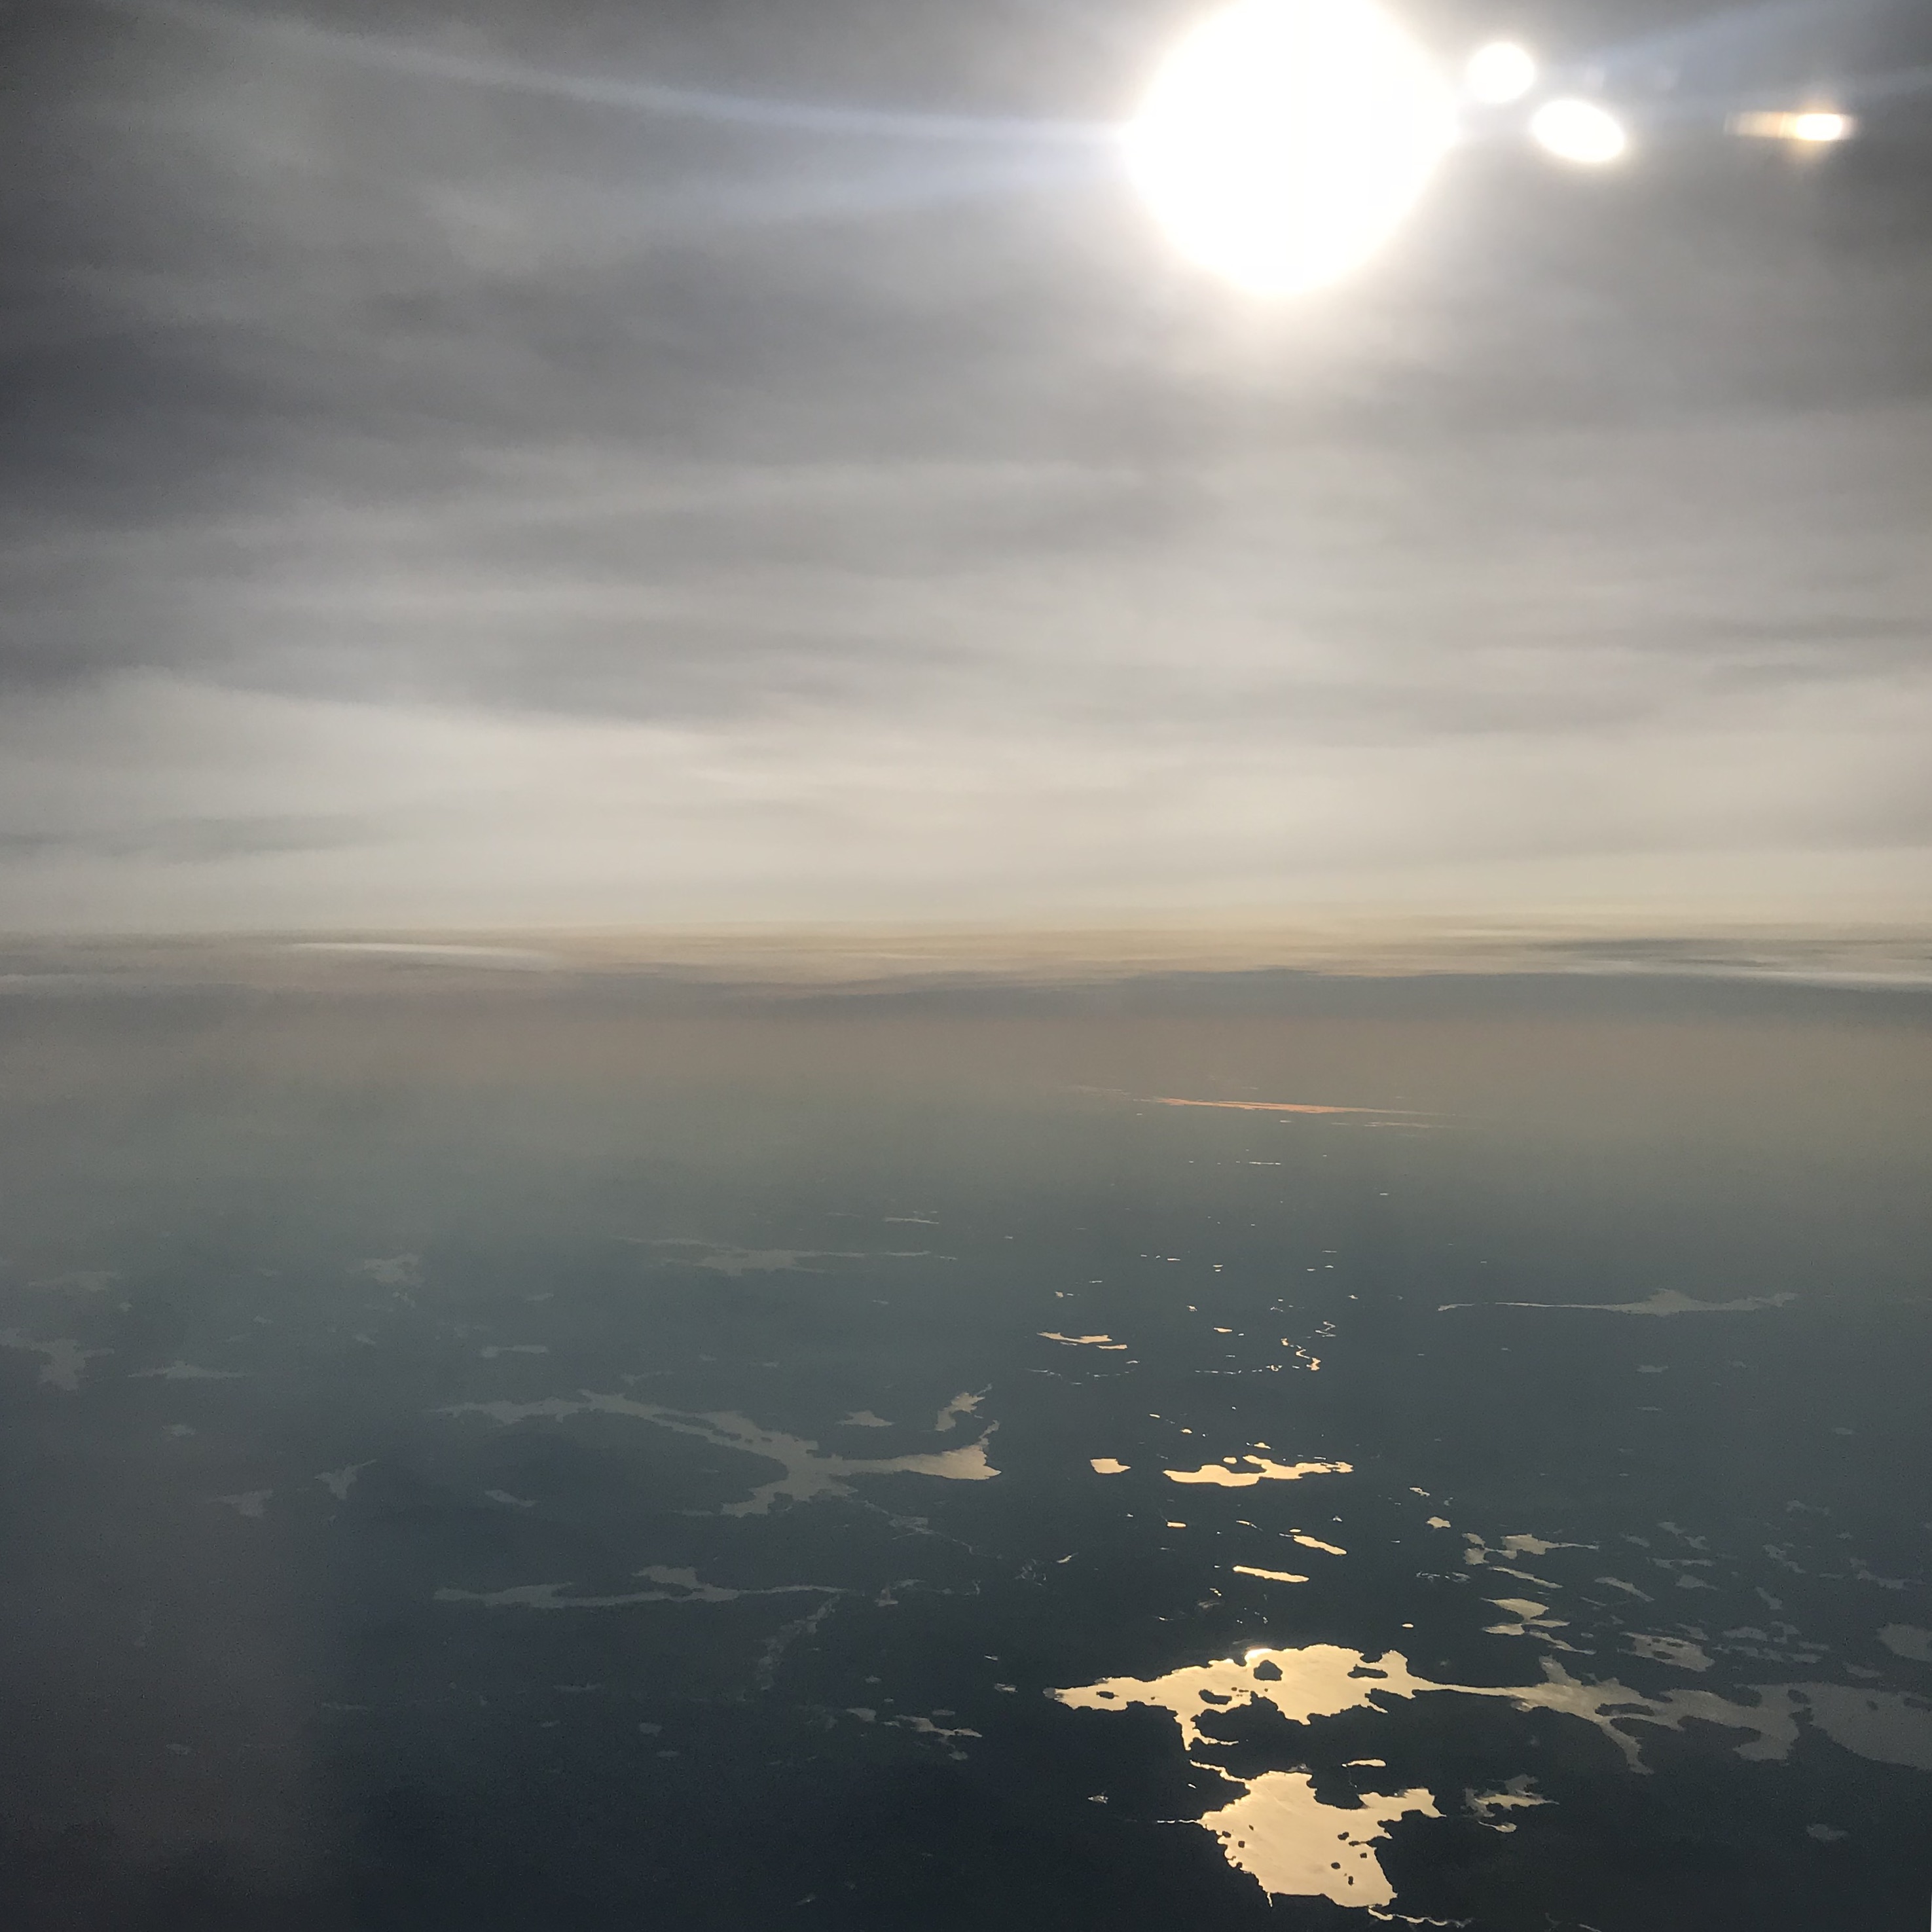 Earth seen from an airplane close to sunset, with the sun reflecting in lakes